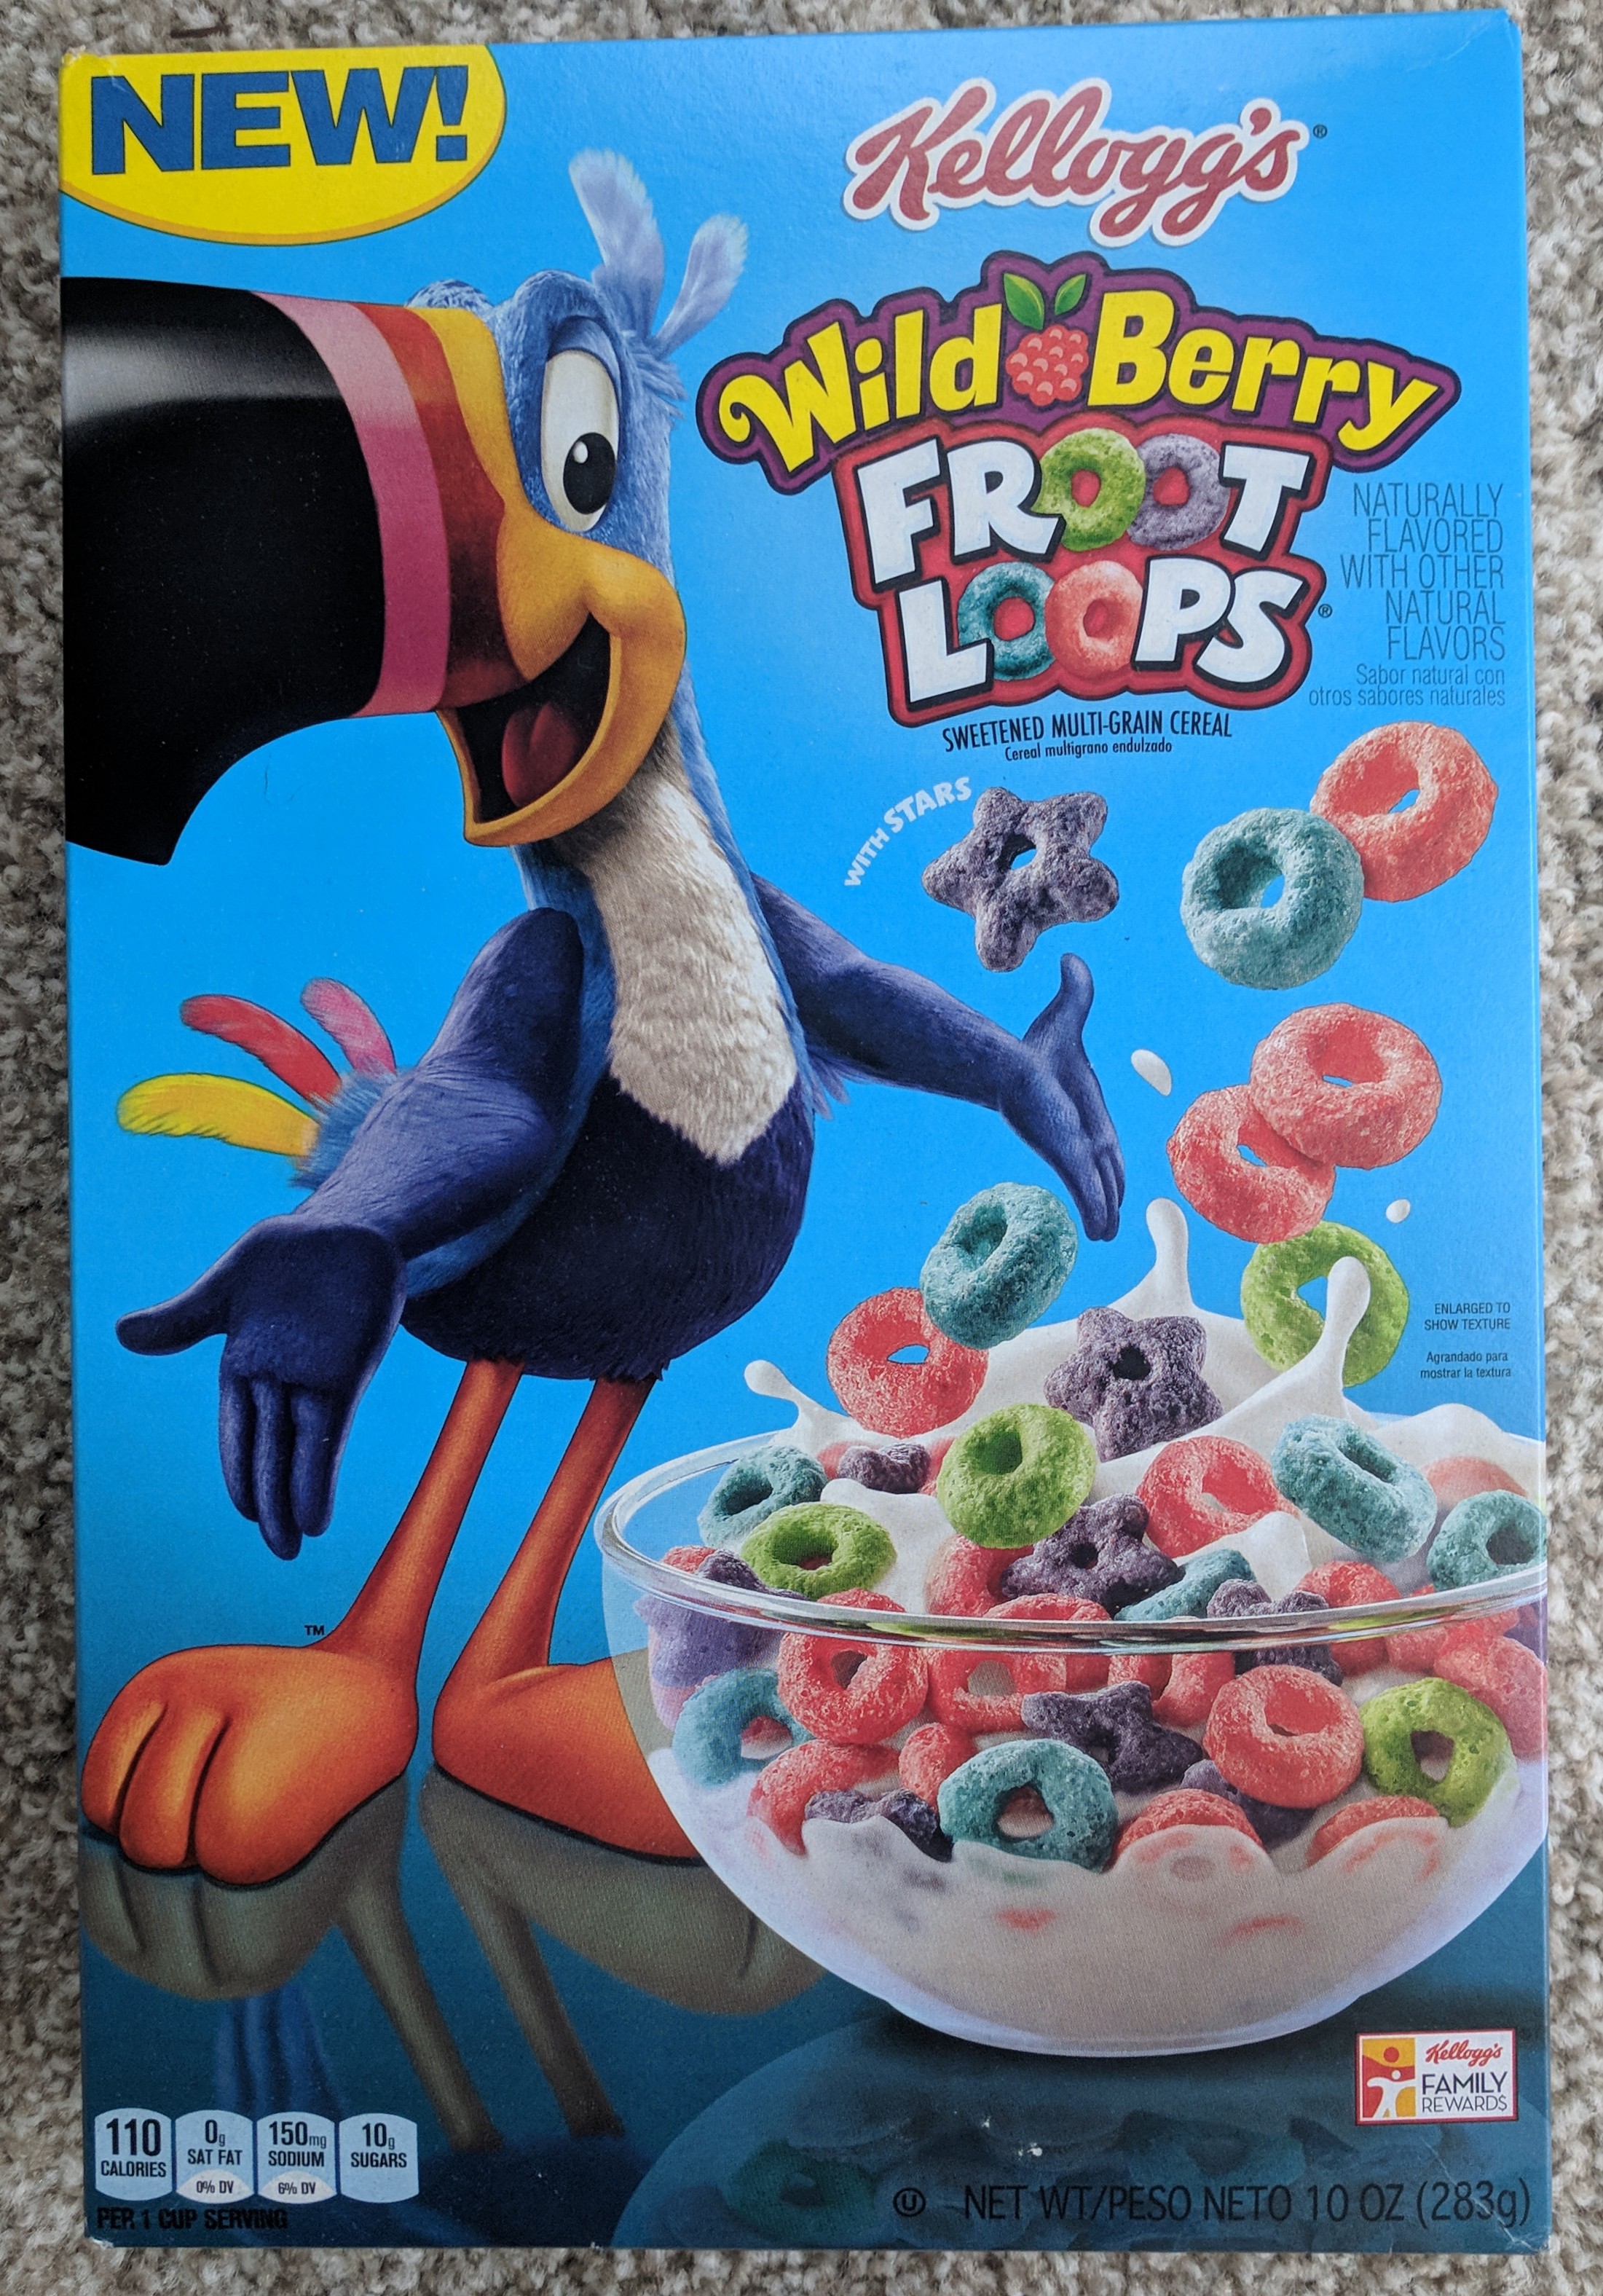 Review: Kellogg's Wild Berry Froot Loops Cereal